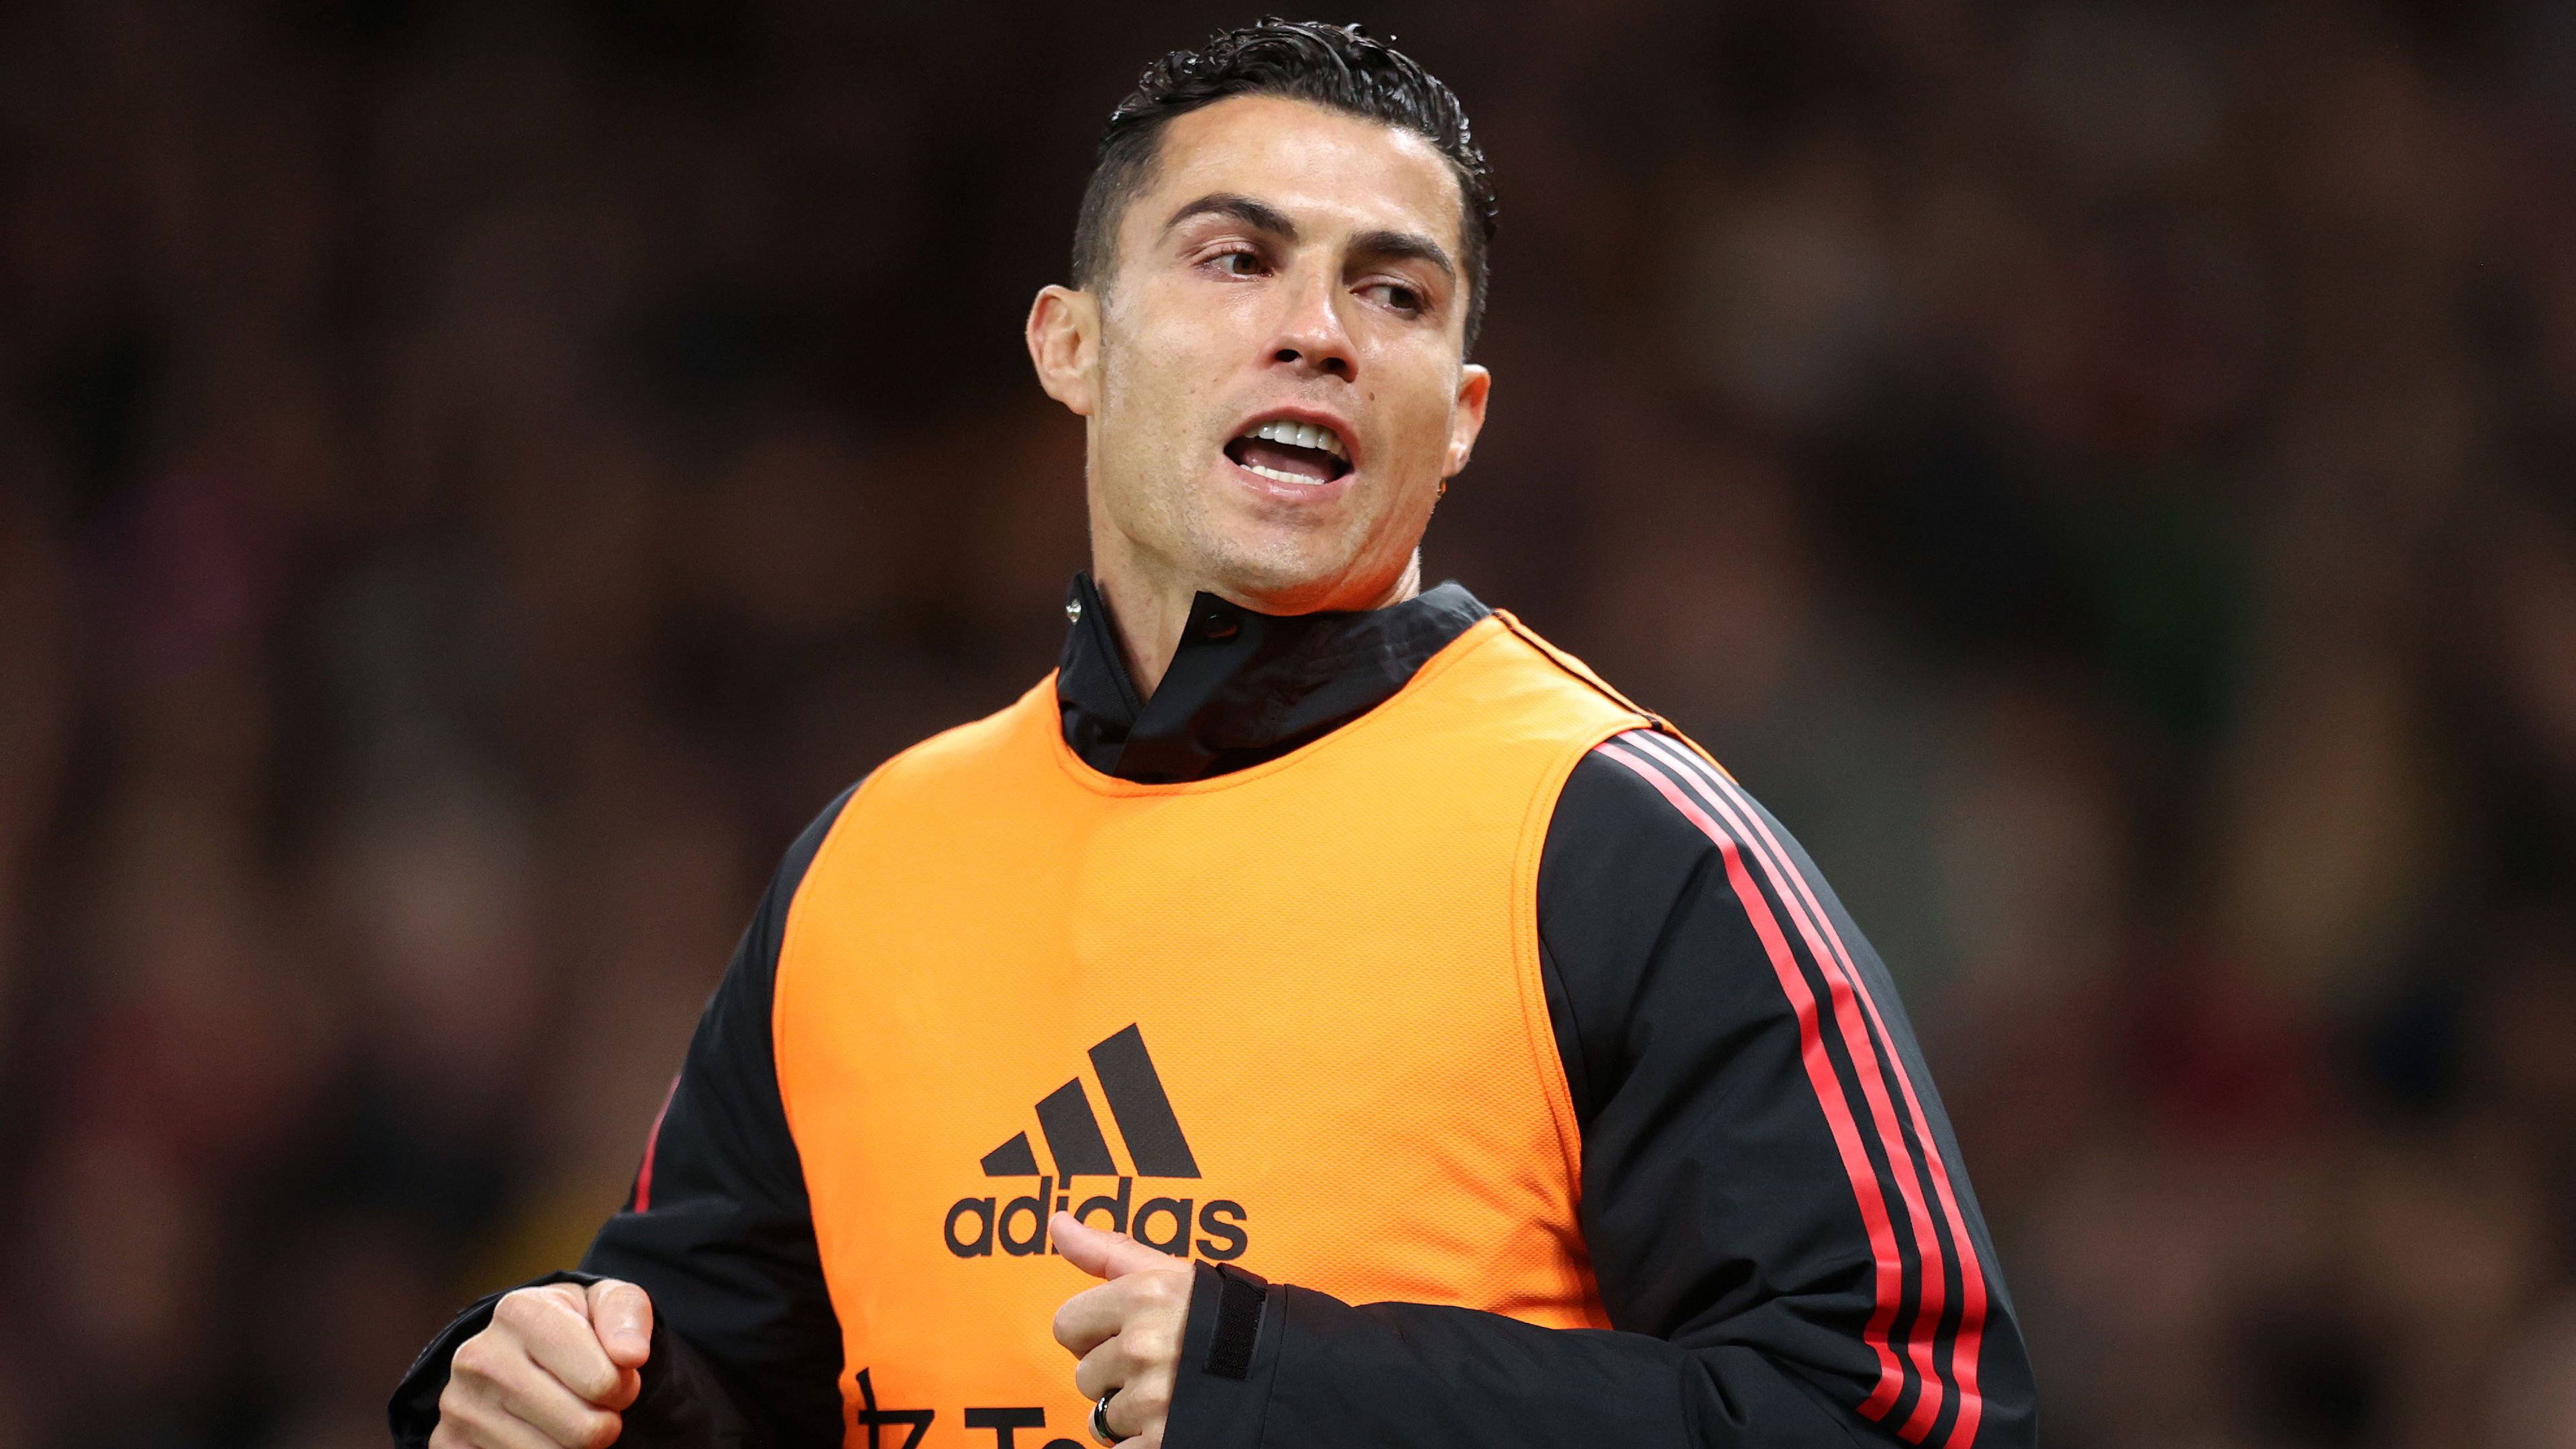 Cristiano Ronaldo warms up on the sidelines but was an unused substitute for Manchester United against Tottenham.